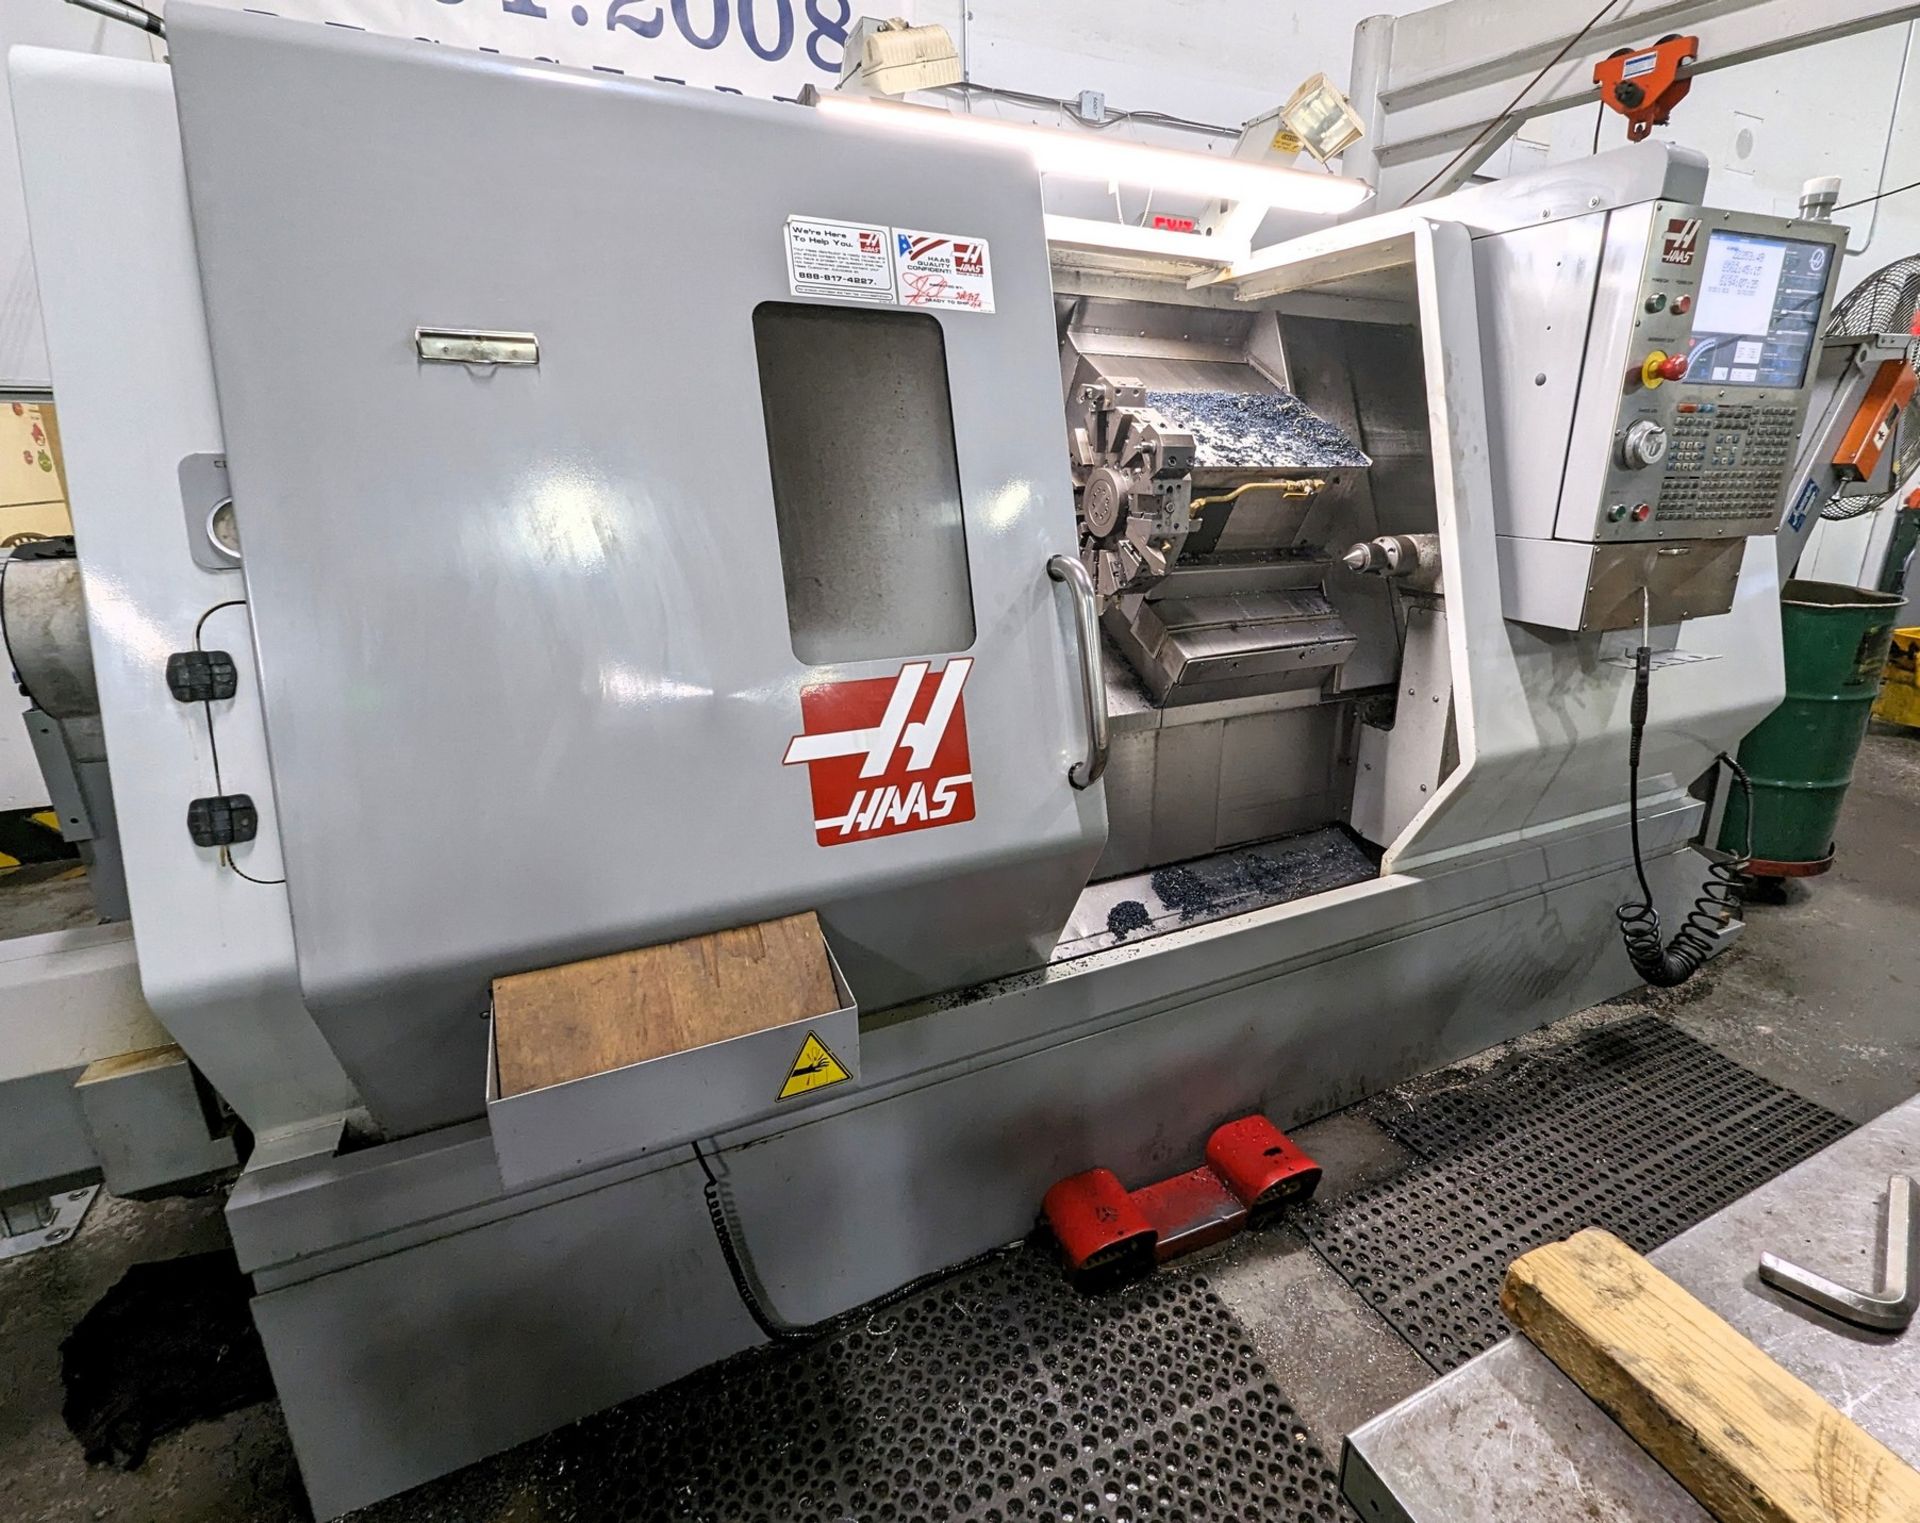 2008 HAAS SL-30TB CNC TURNING CENTER, CNC CONTROL, 15” CHUCK, BIG BORE, TAILSTOCK, TOOL SETTER, CHIP - Image 4 of 14